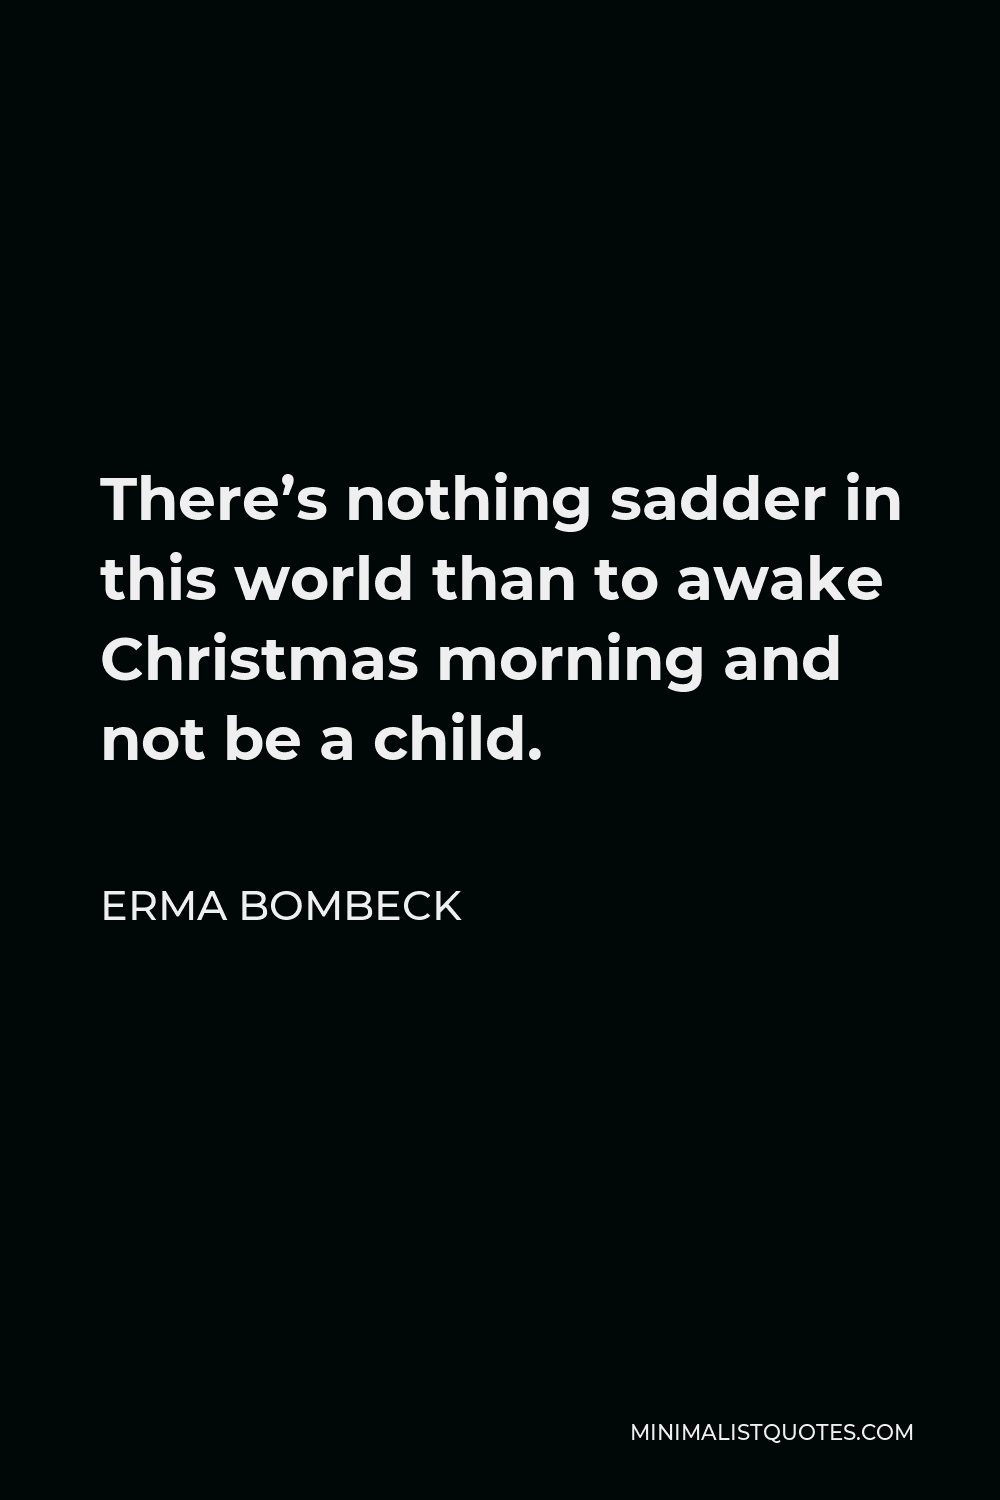 Erma Bombeck Quote - There’s nothing sadder in this world than to awake Christmas morning and not be a child.